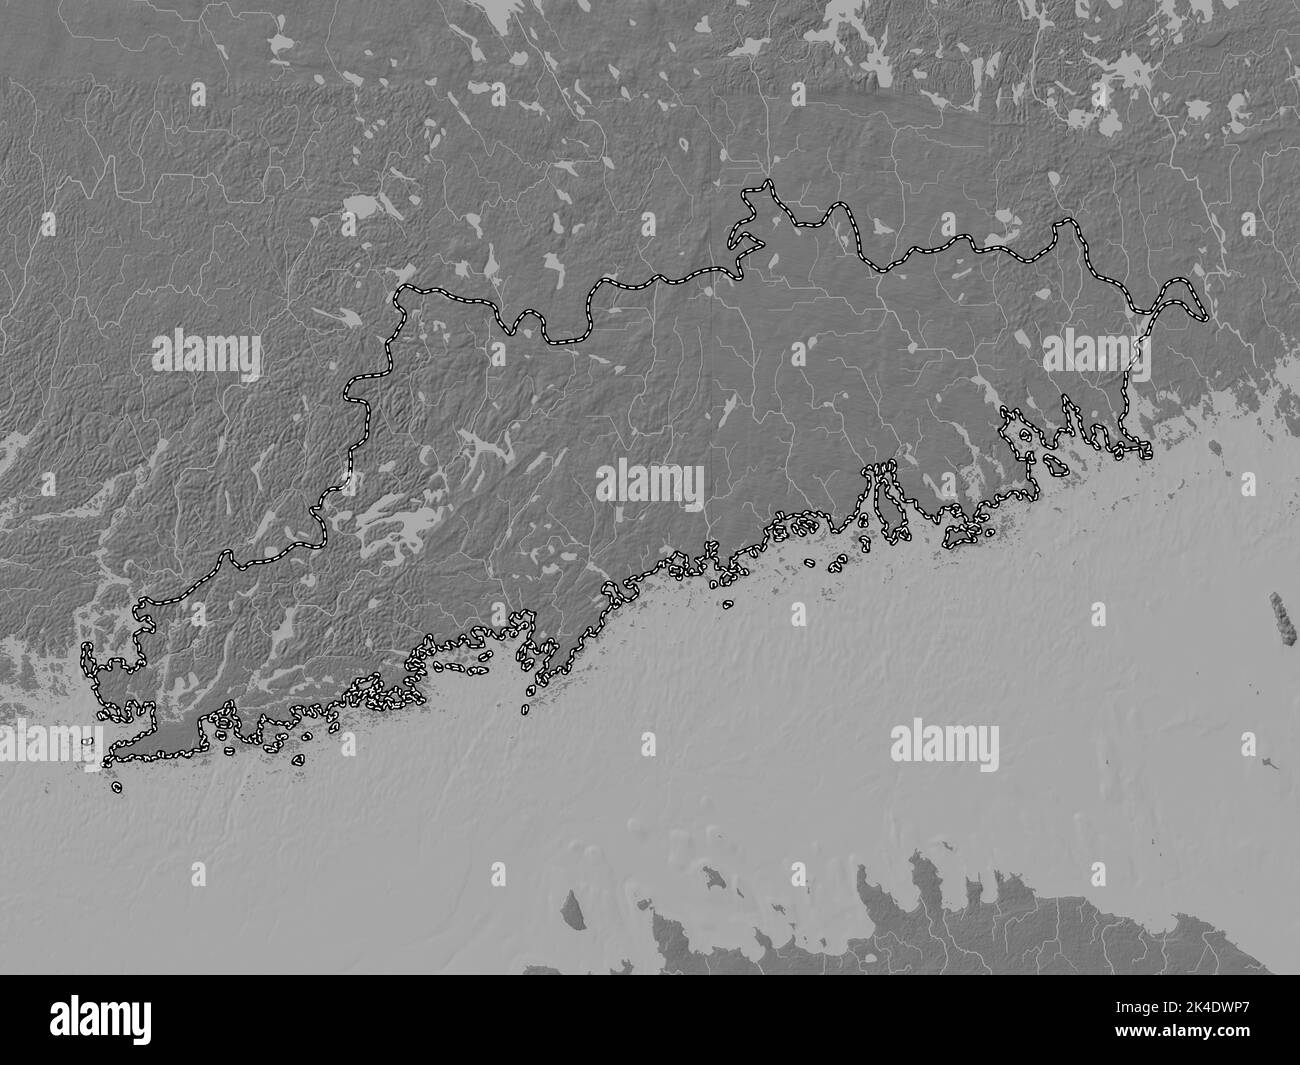 Uusimaa, region of Finland. Bilevel elevation map with lakes and rivers Stock Photo